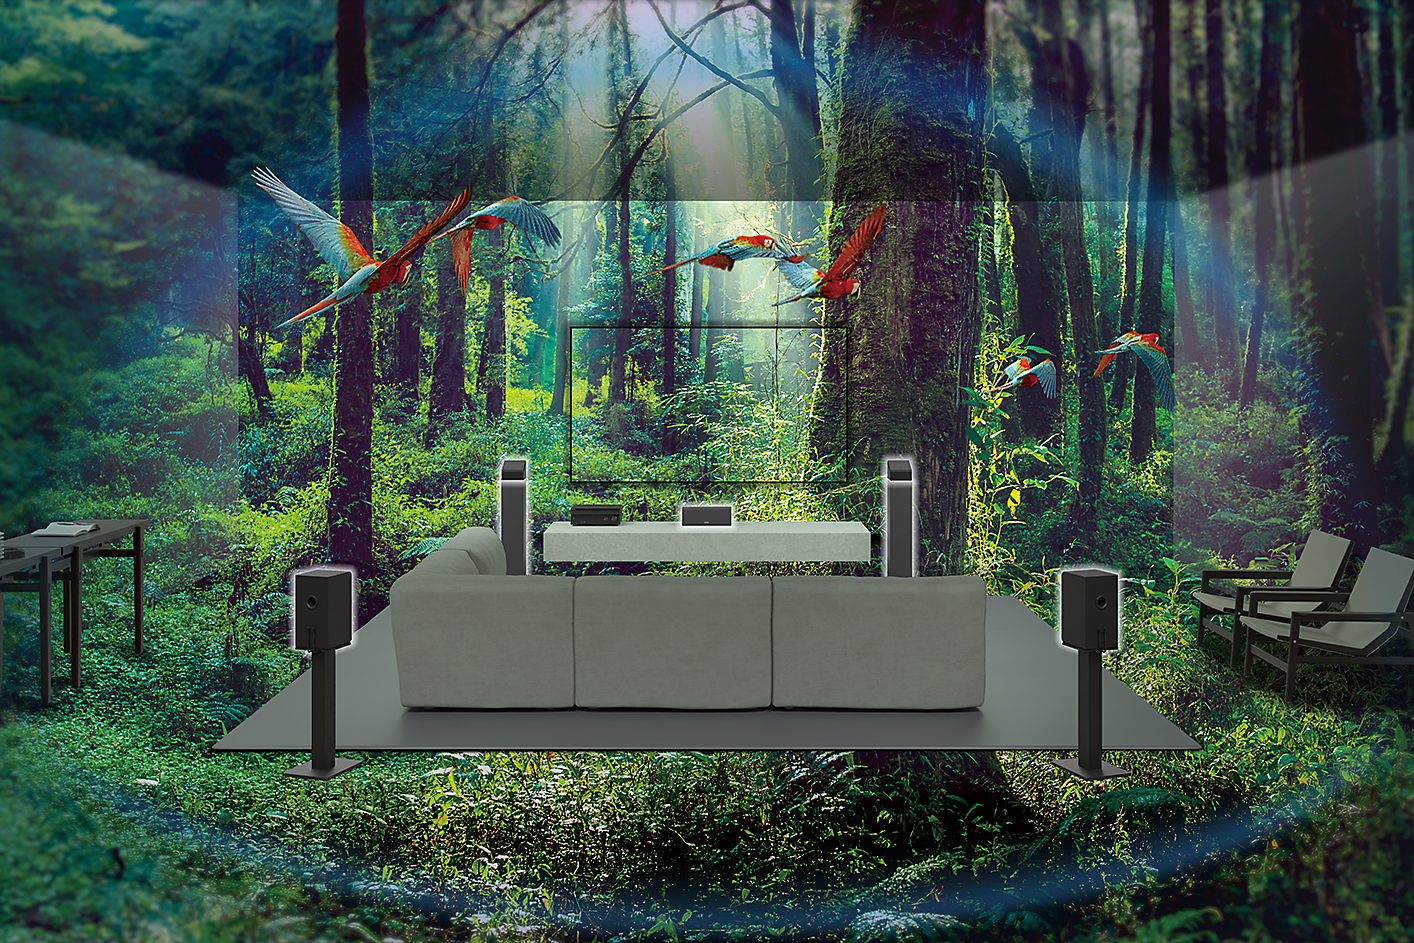 Image of a sofa, TV and speakers in the middle of a forest with parrots flying around